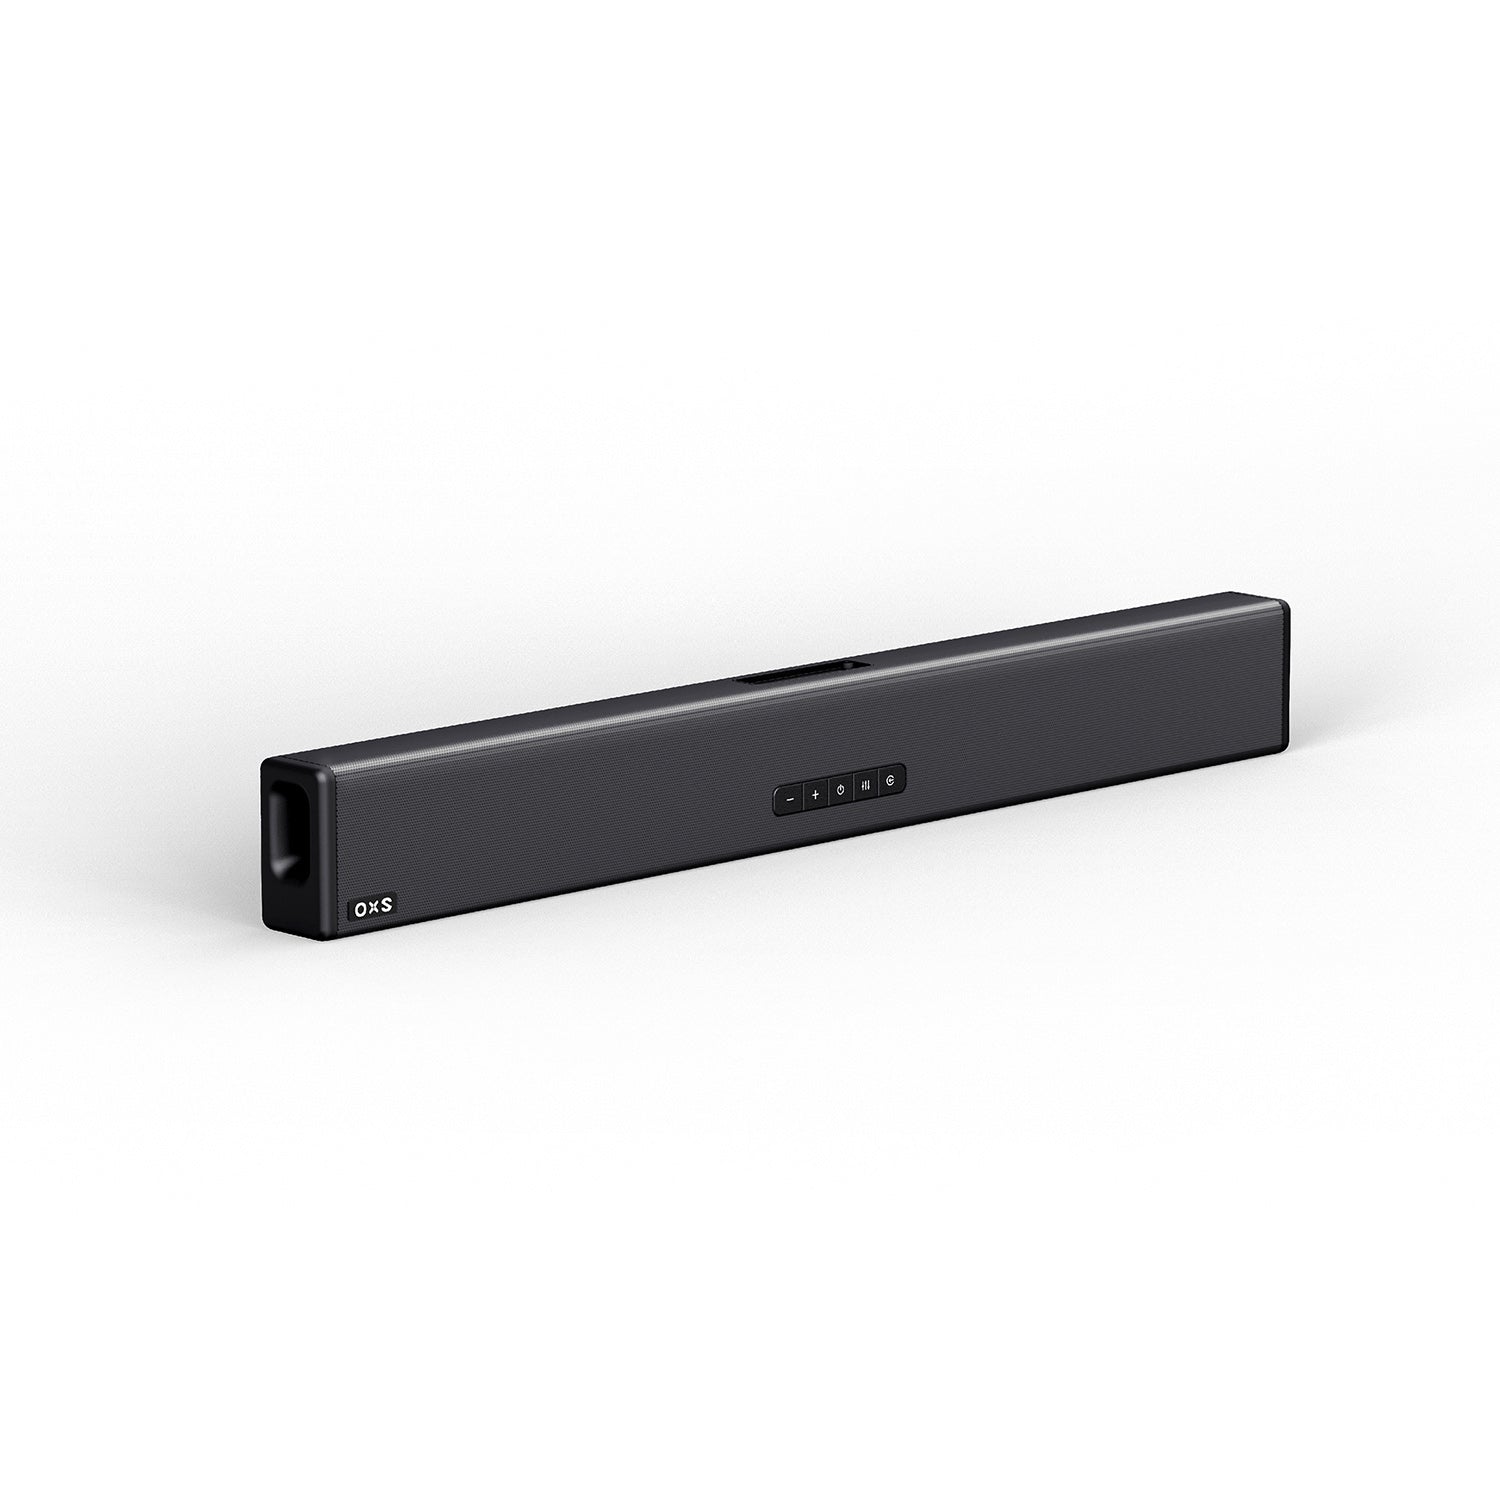 OXS S3 Sound Bars for TV, Home Theater Audio with Built-in Subwoofer